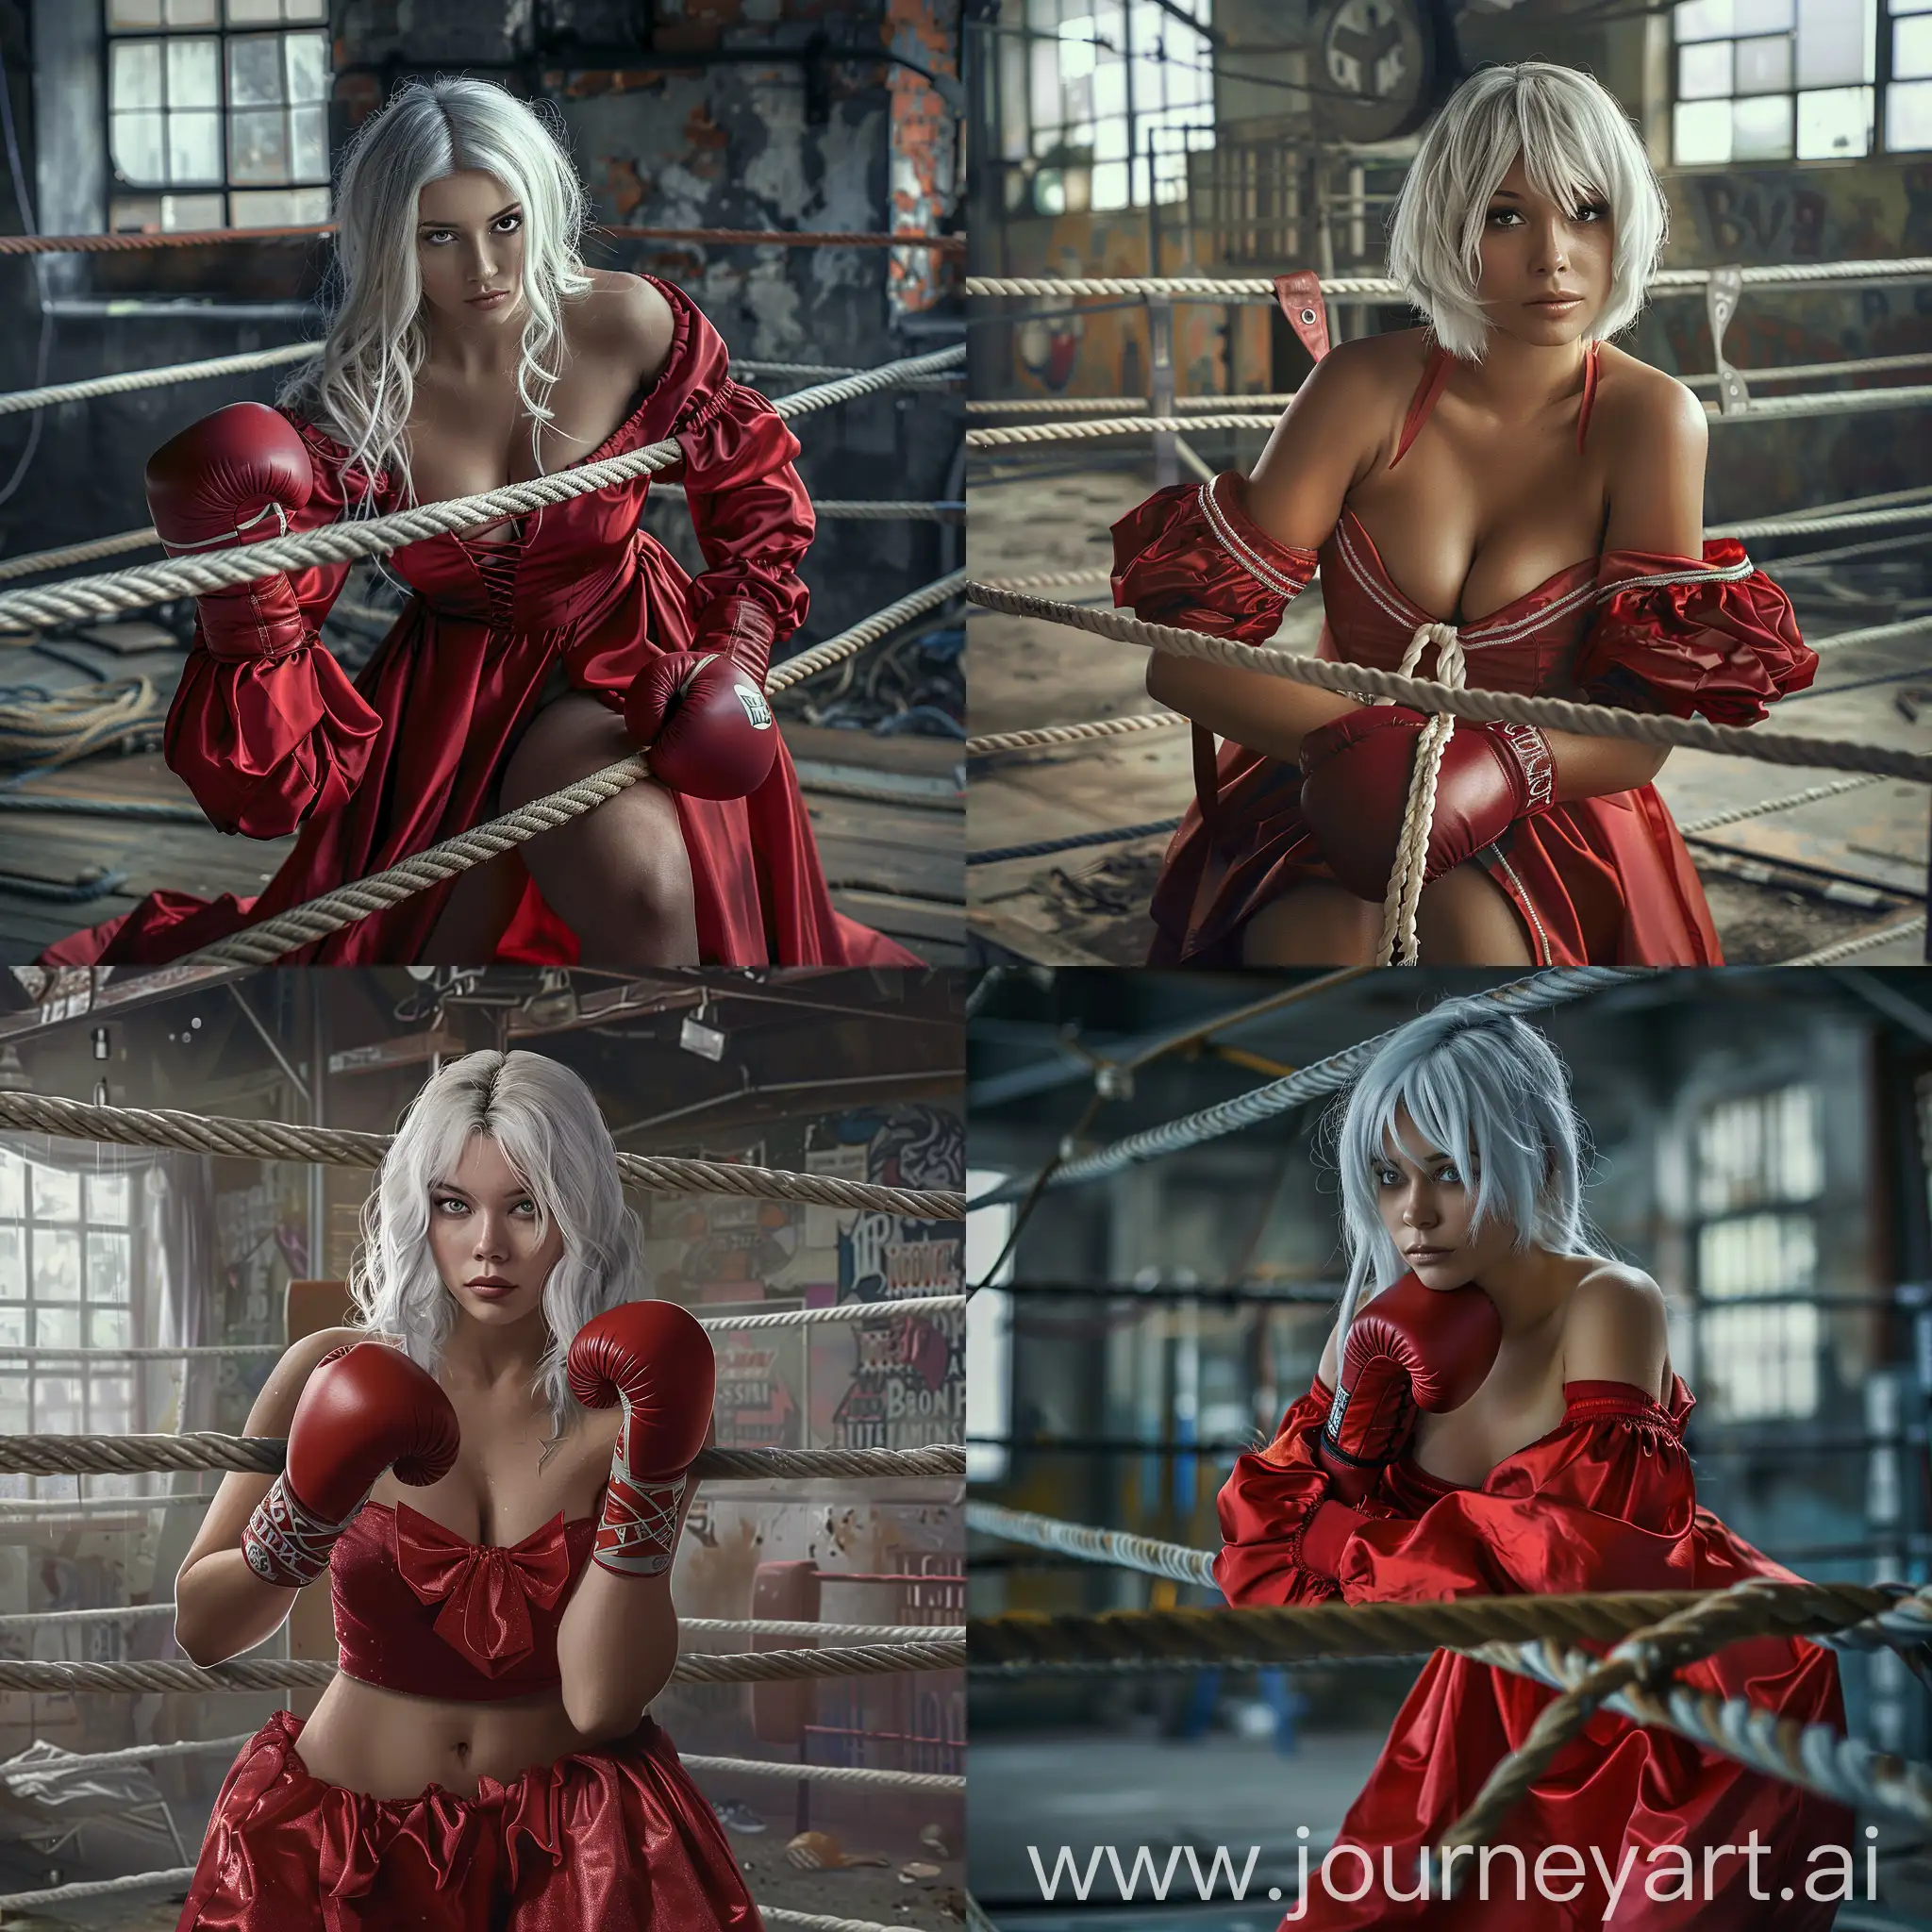 A gorgeous young female boxer with white hair, dressed in a red cheerleader gown. She is leaning on boxing ring ropes in a gritty boxing gym